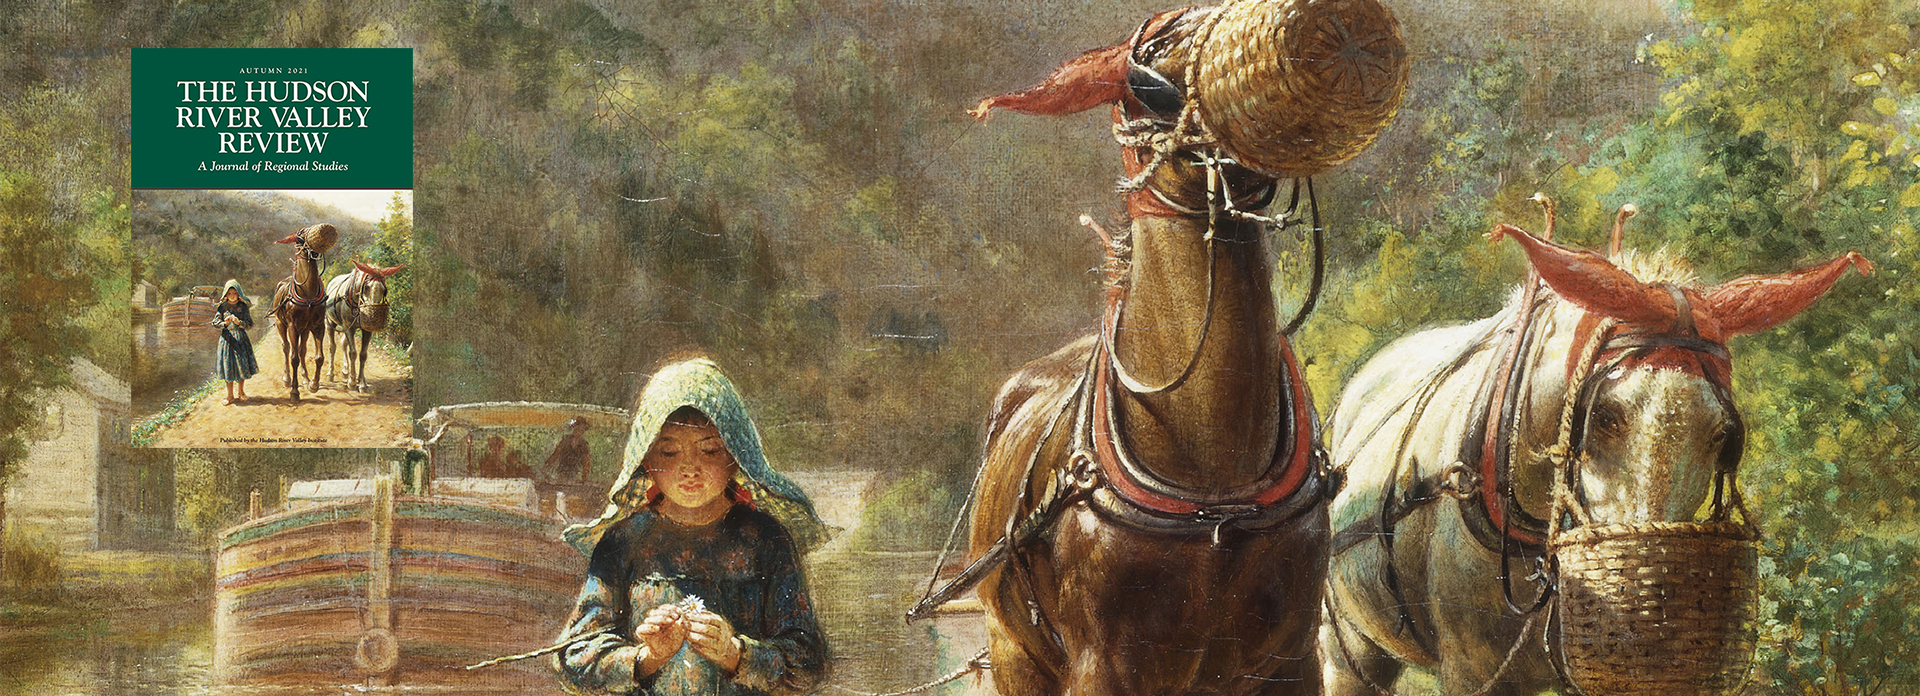 detail of cover of HRVR issue 38.1 showing a young girl leading two horses along the D&H Canal towpath. There is a canal barge in the background